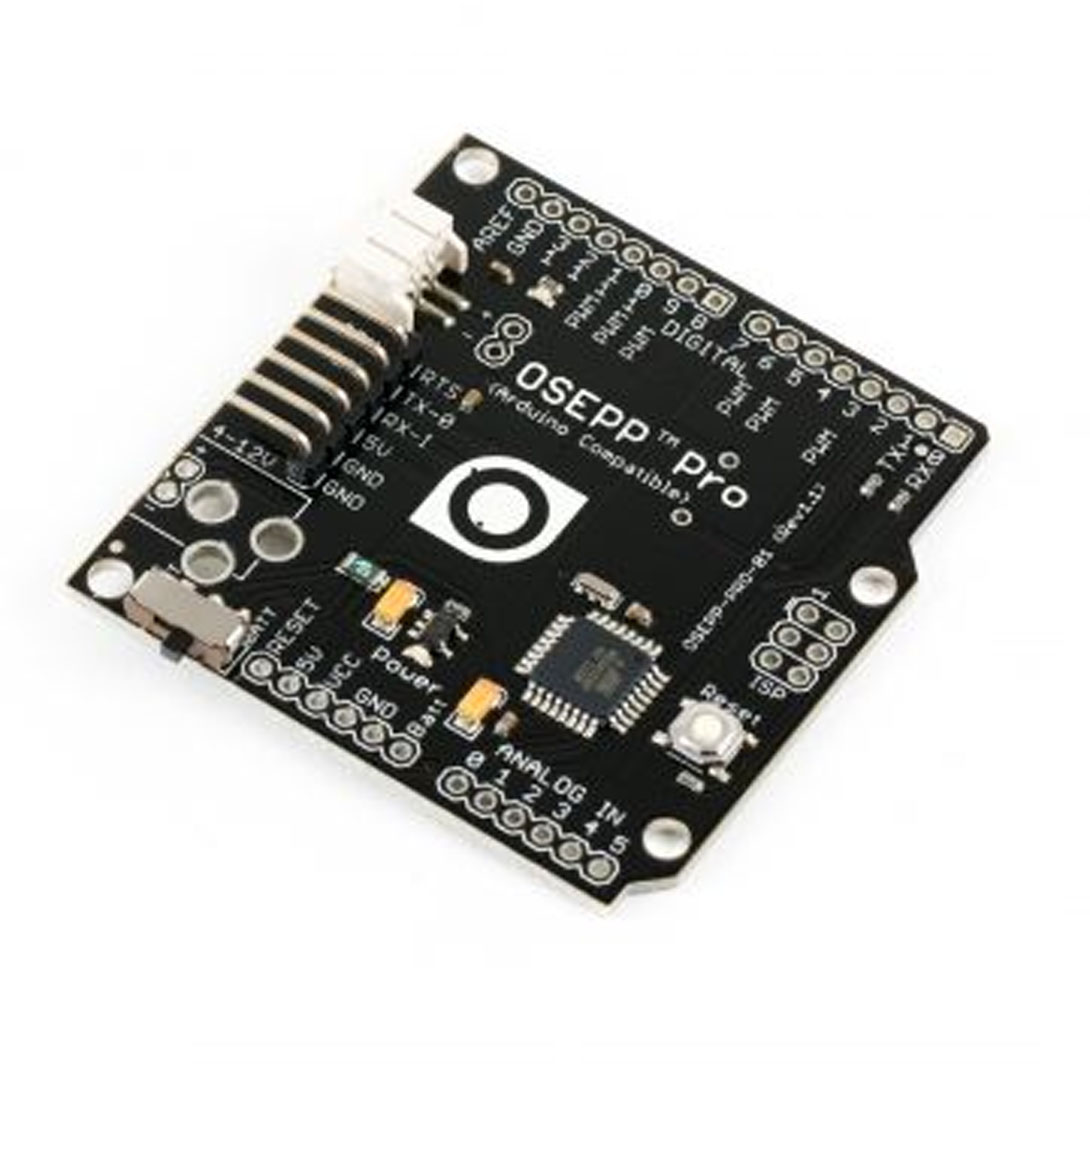 BOARDS COMPATIBLE WITH ARDUINO 1036